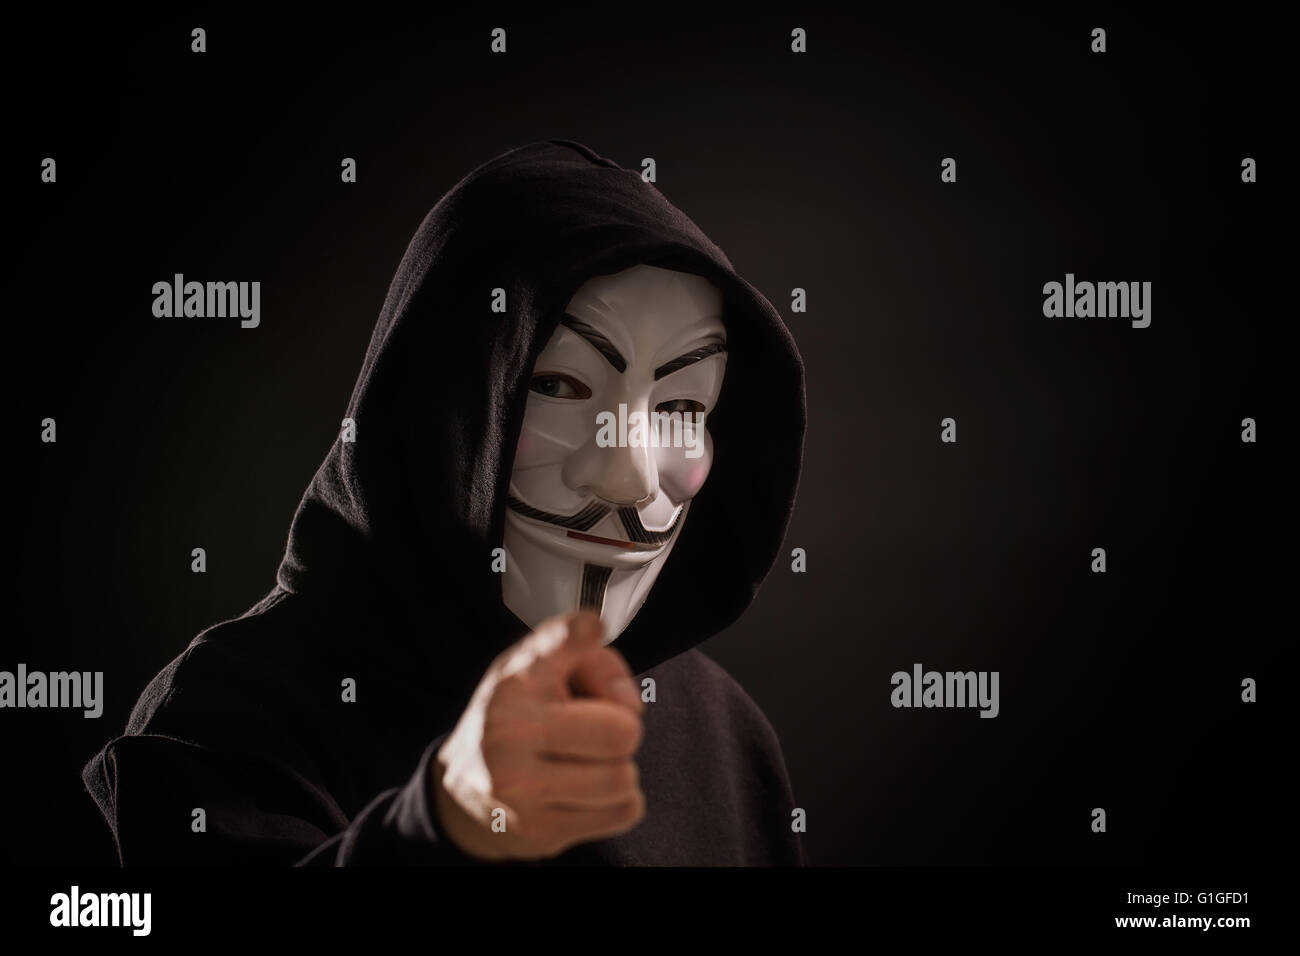 Bełchatow, Poland - December 06, 2015: Man wearing Vendetta mask - symbol for the online hacktivist group Anonymous. Black backg Stock Photo